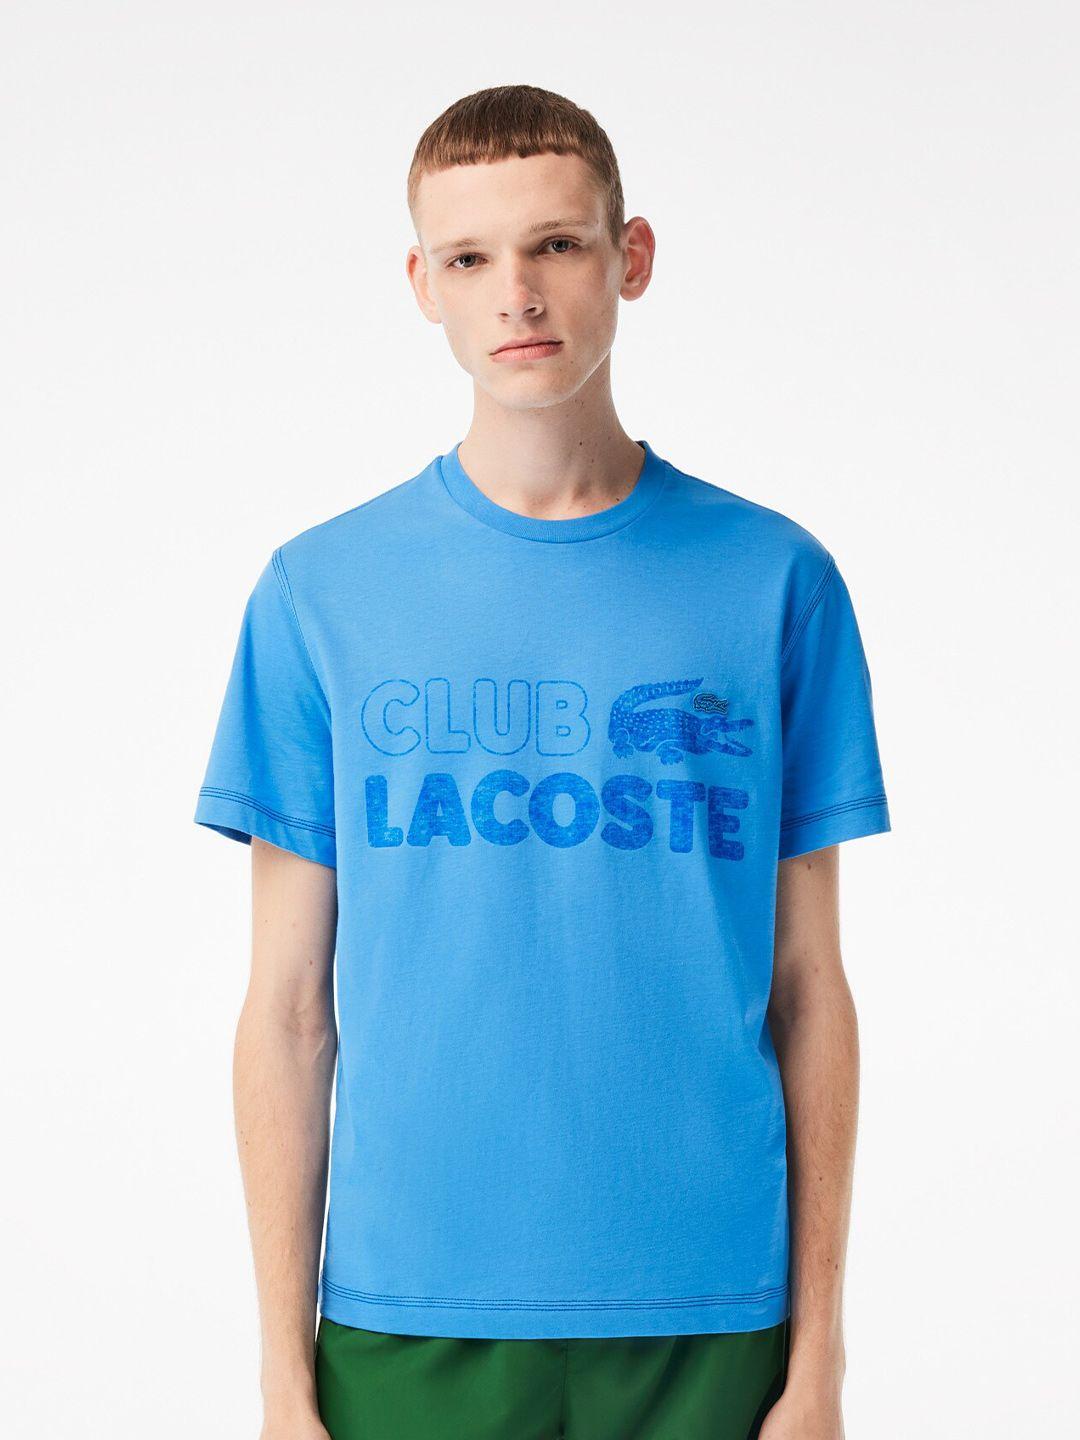 lacoste typography print pure cotton t-shirt